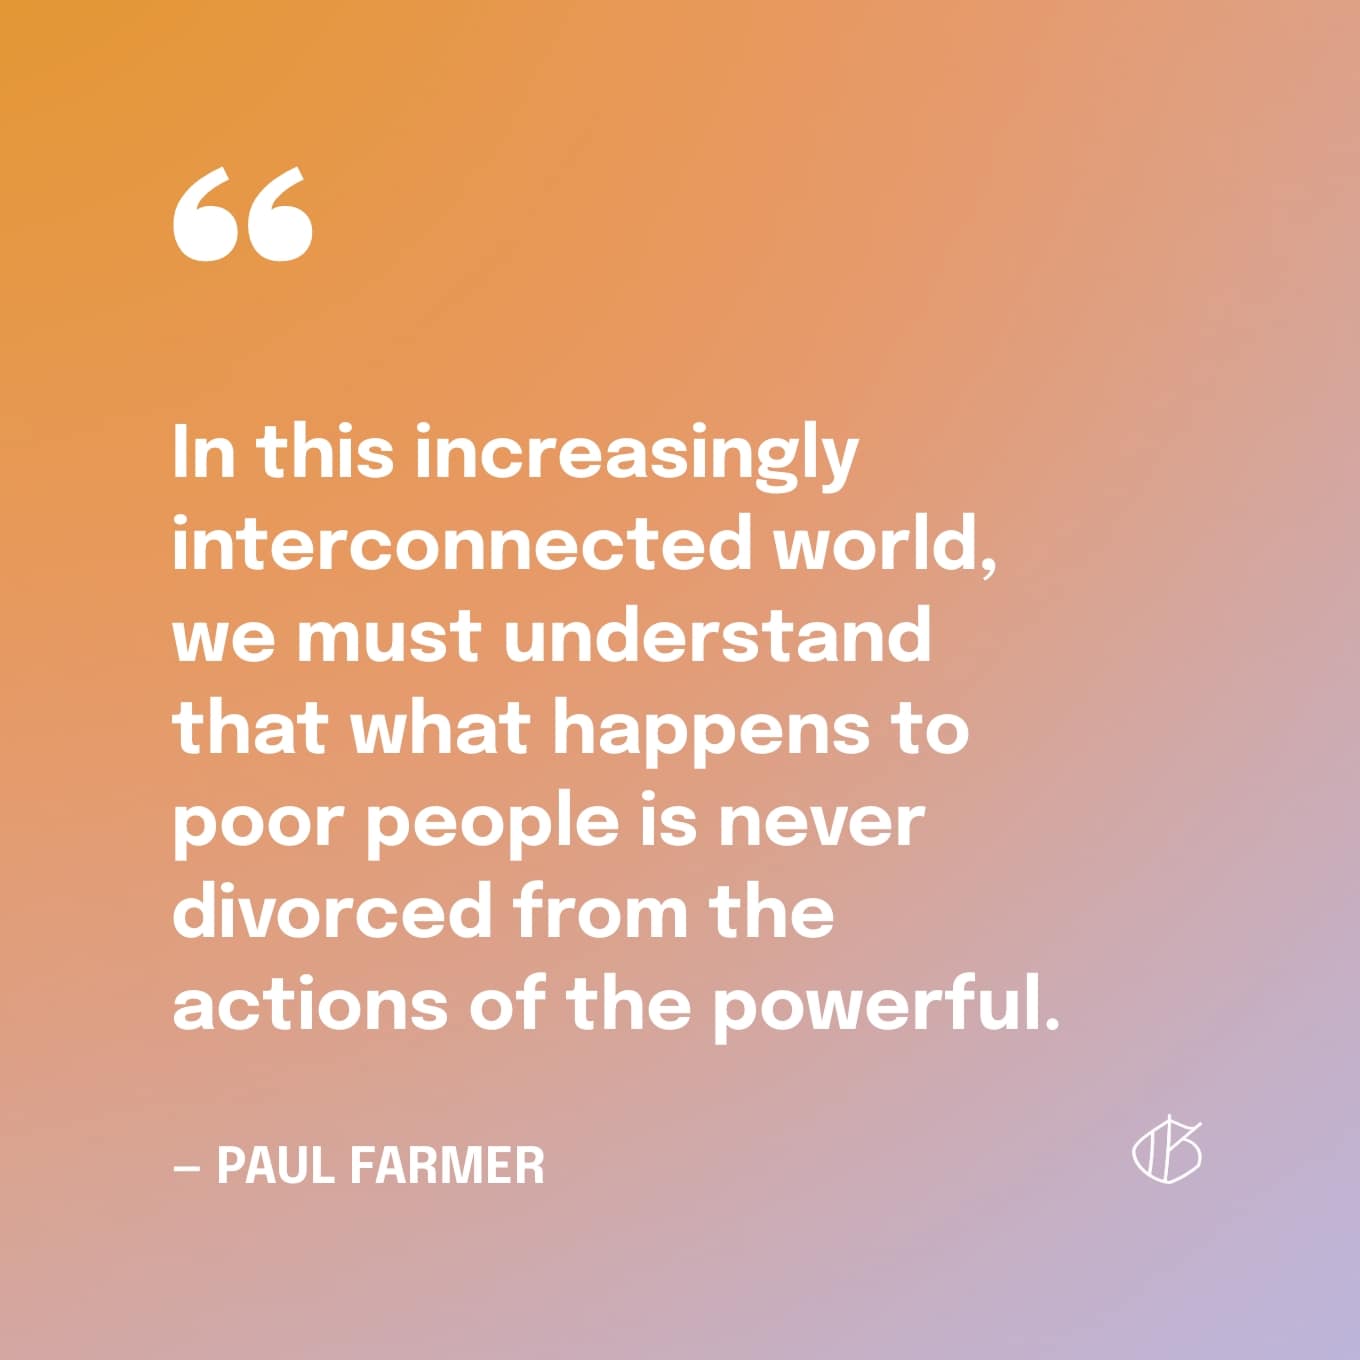 In this increasingly interconnected world, we must understand that what happens to poor people is never divorced from the actions of the powerful — Paul Farmer quote